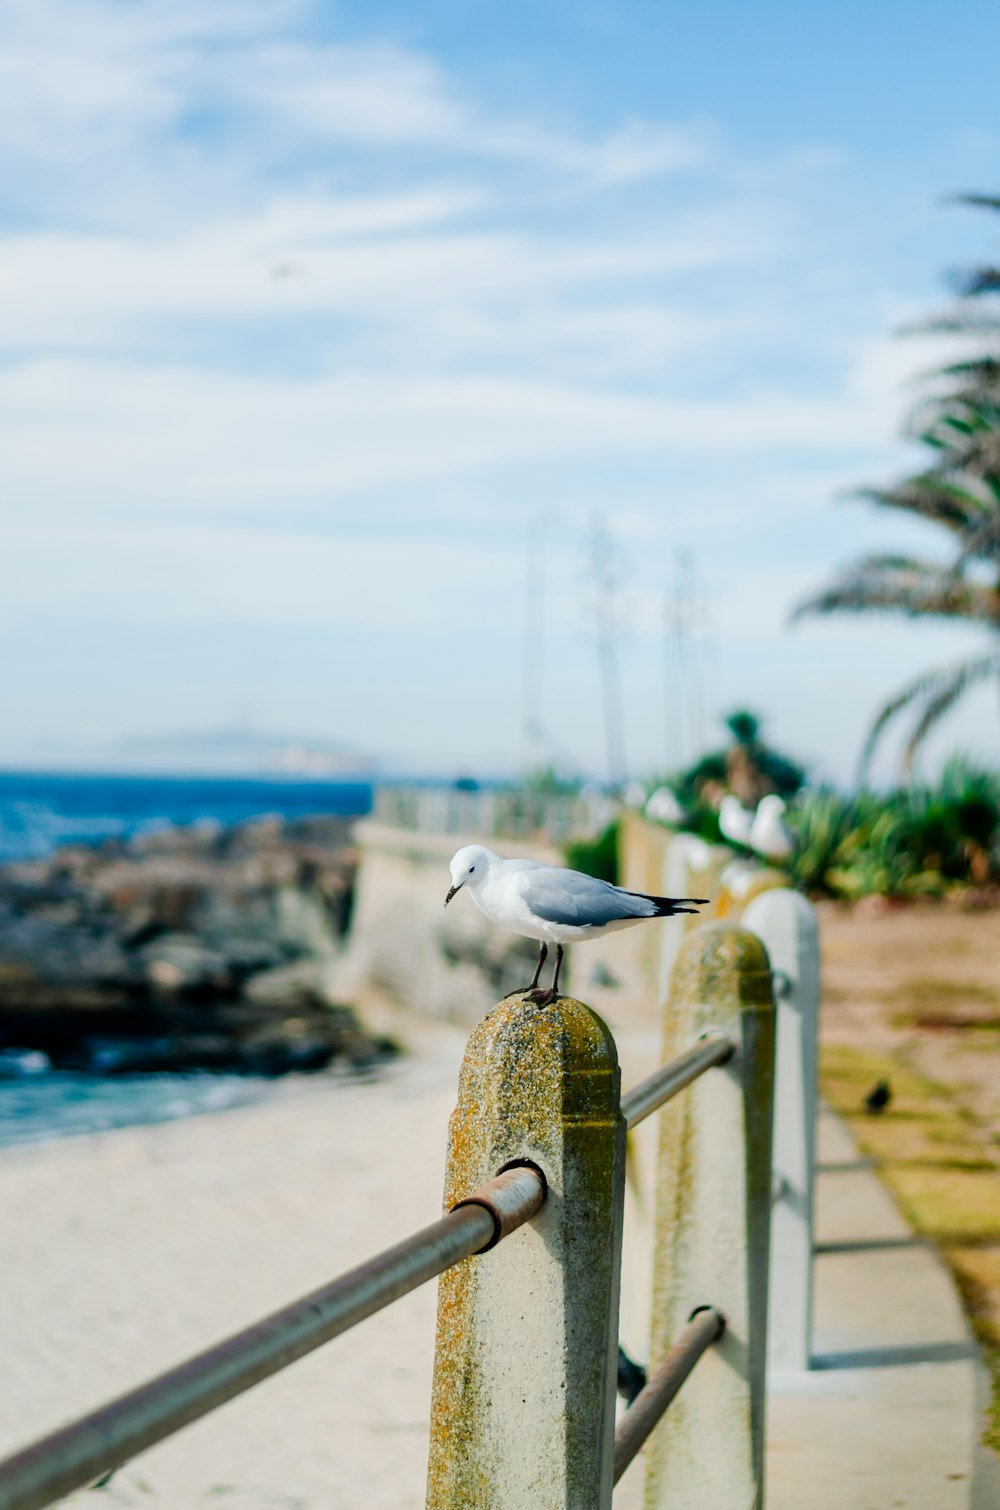 a seagull is sitting on a railing by the beach